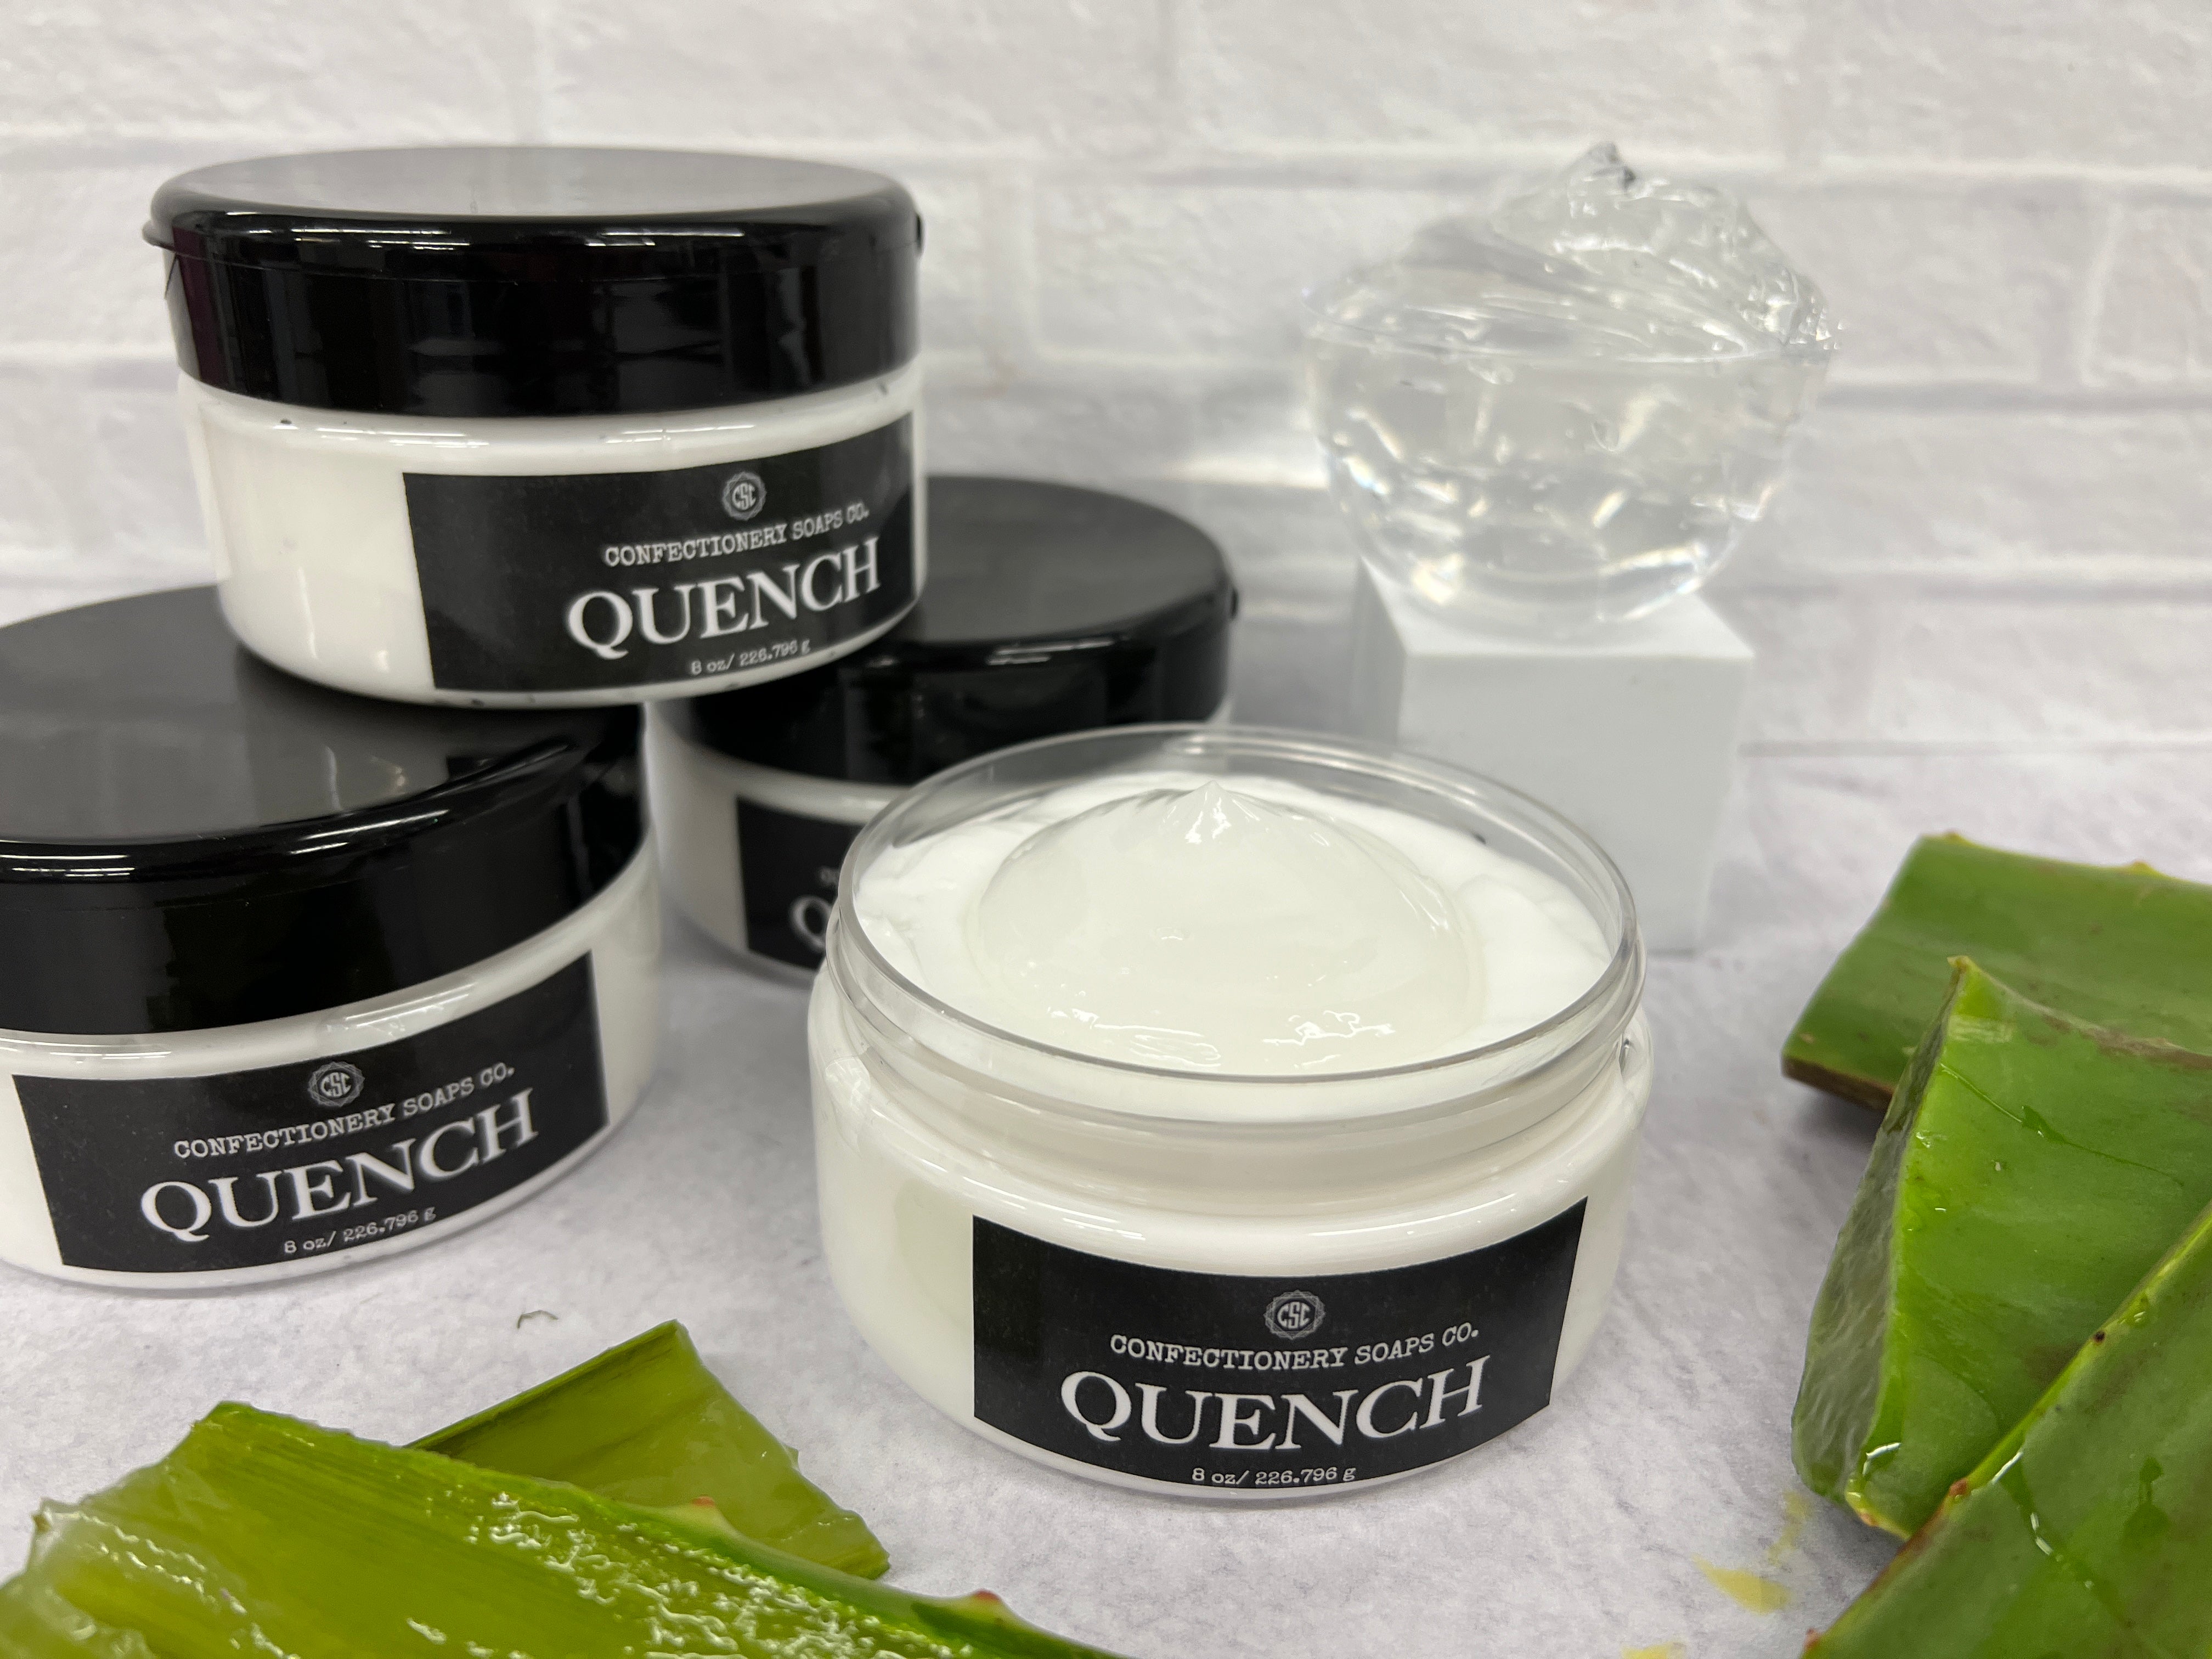 three quench jars stacked in a triangular formation for height, an open/exposed quench jar so you can see the aloe center, a bowl of aloe gel as deocration and aloe plant pieces surrounding the quench jars as decoration.